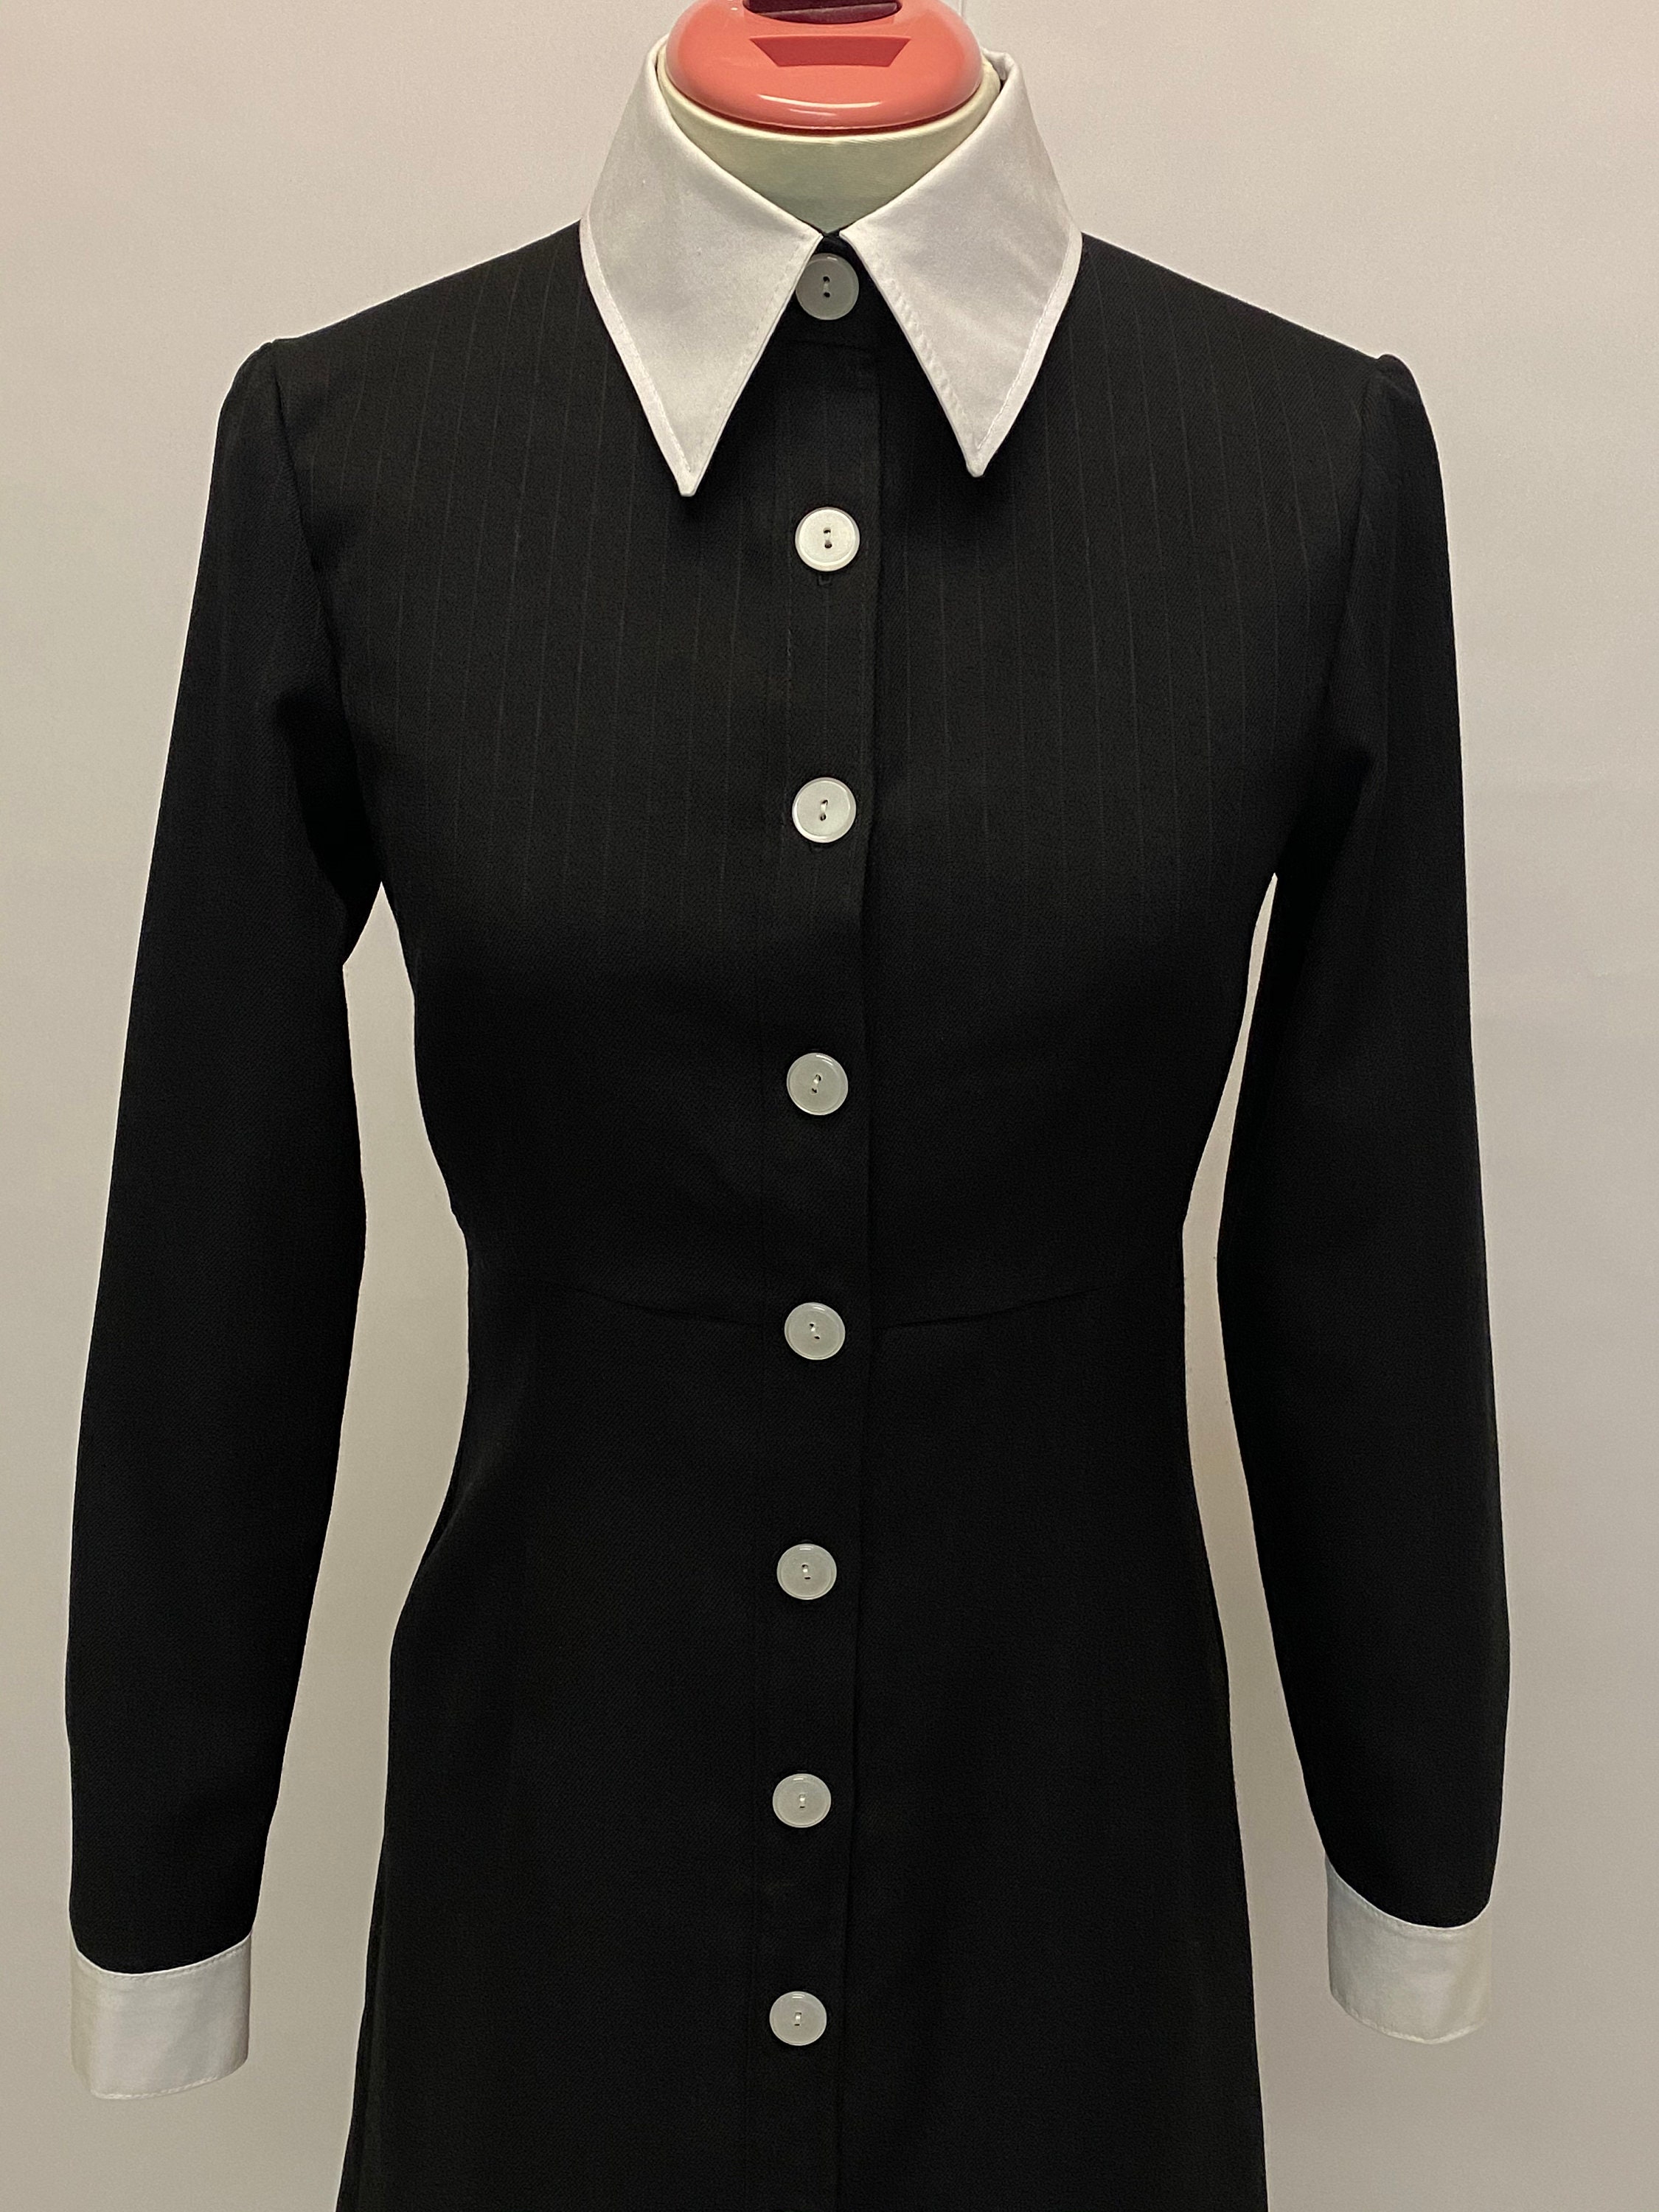 WEDNESDAY ADDAMS Girl's Costume & Wig Size 14 - Etsy Canada